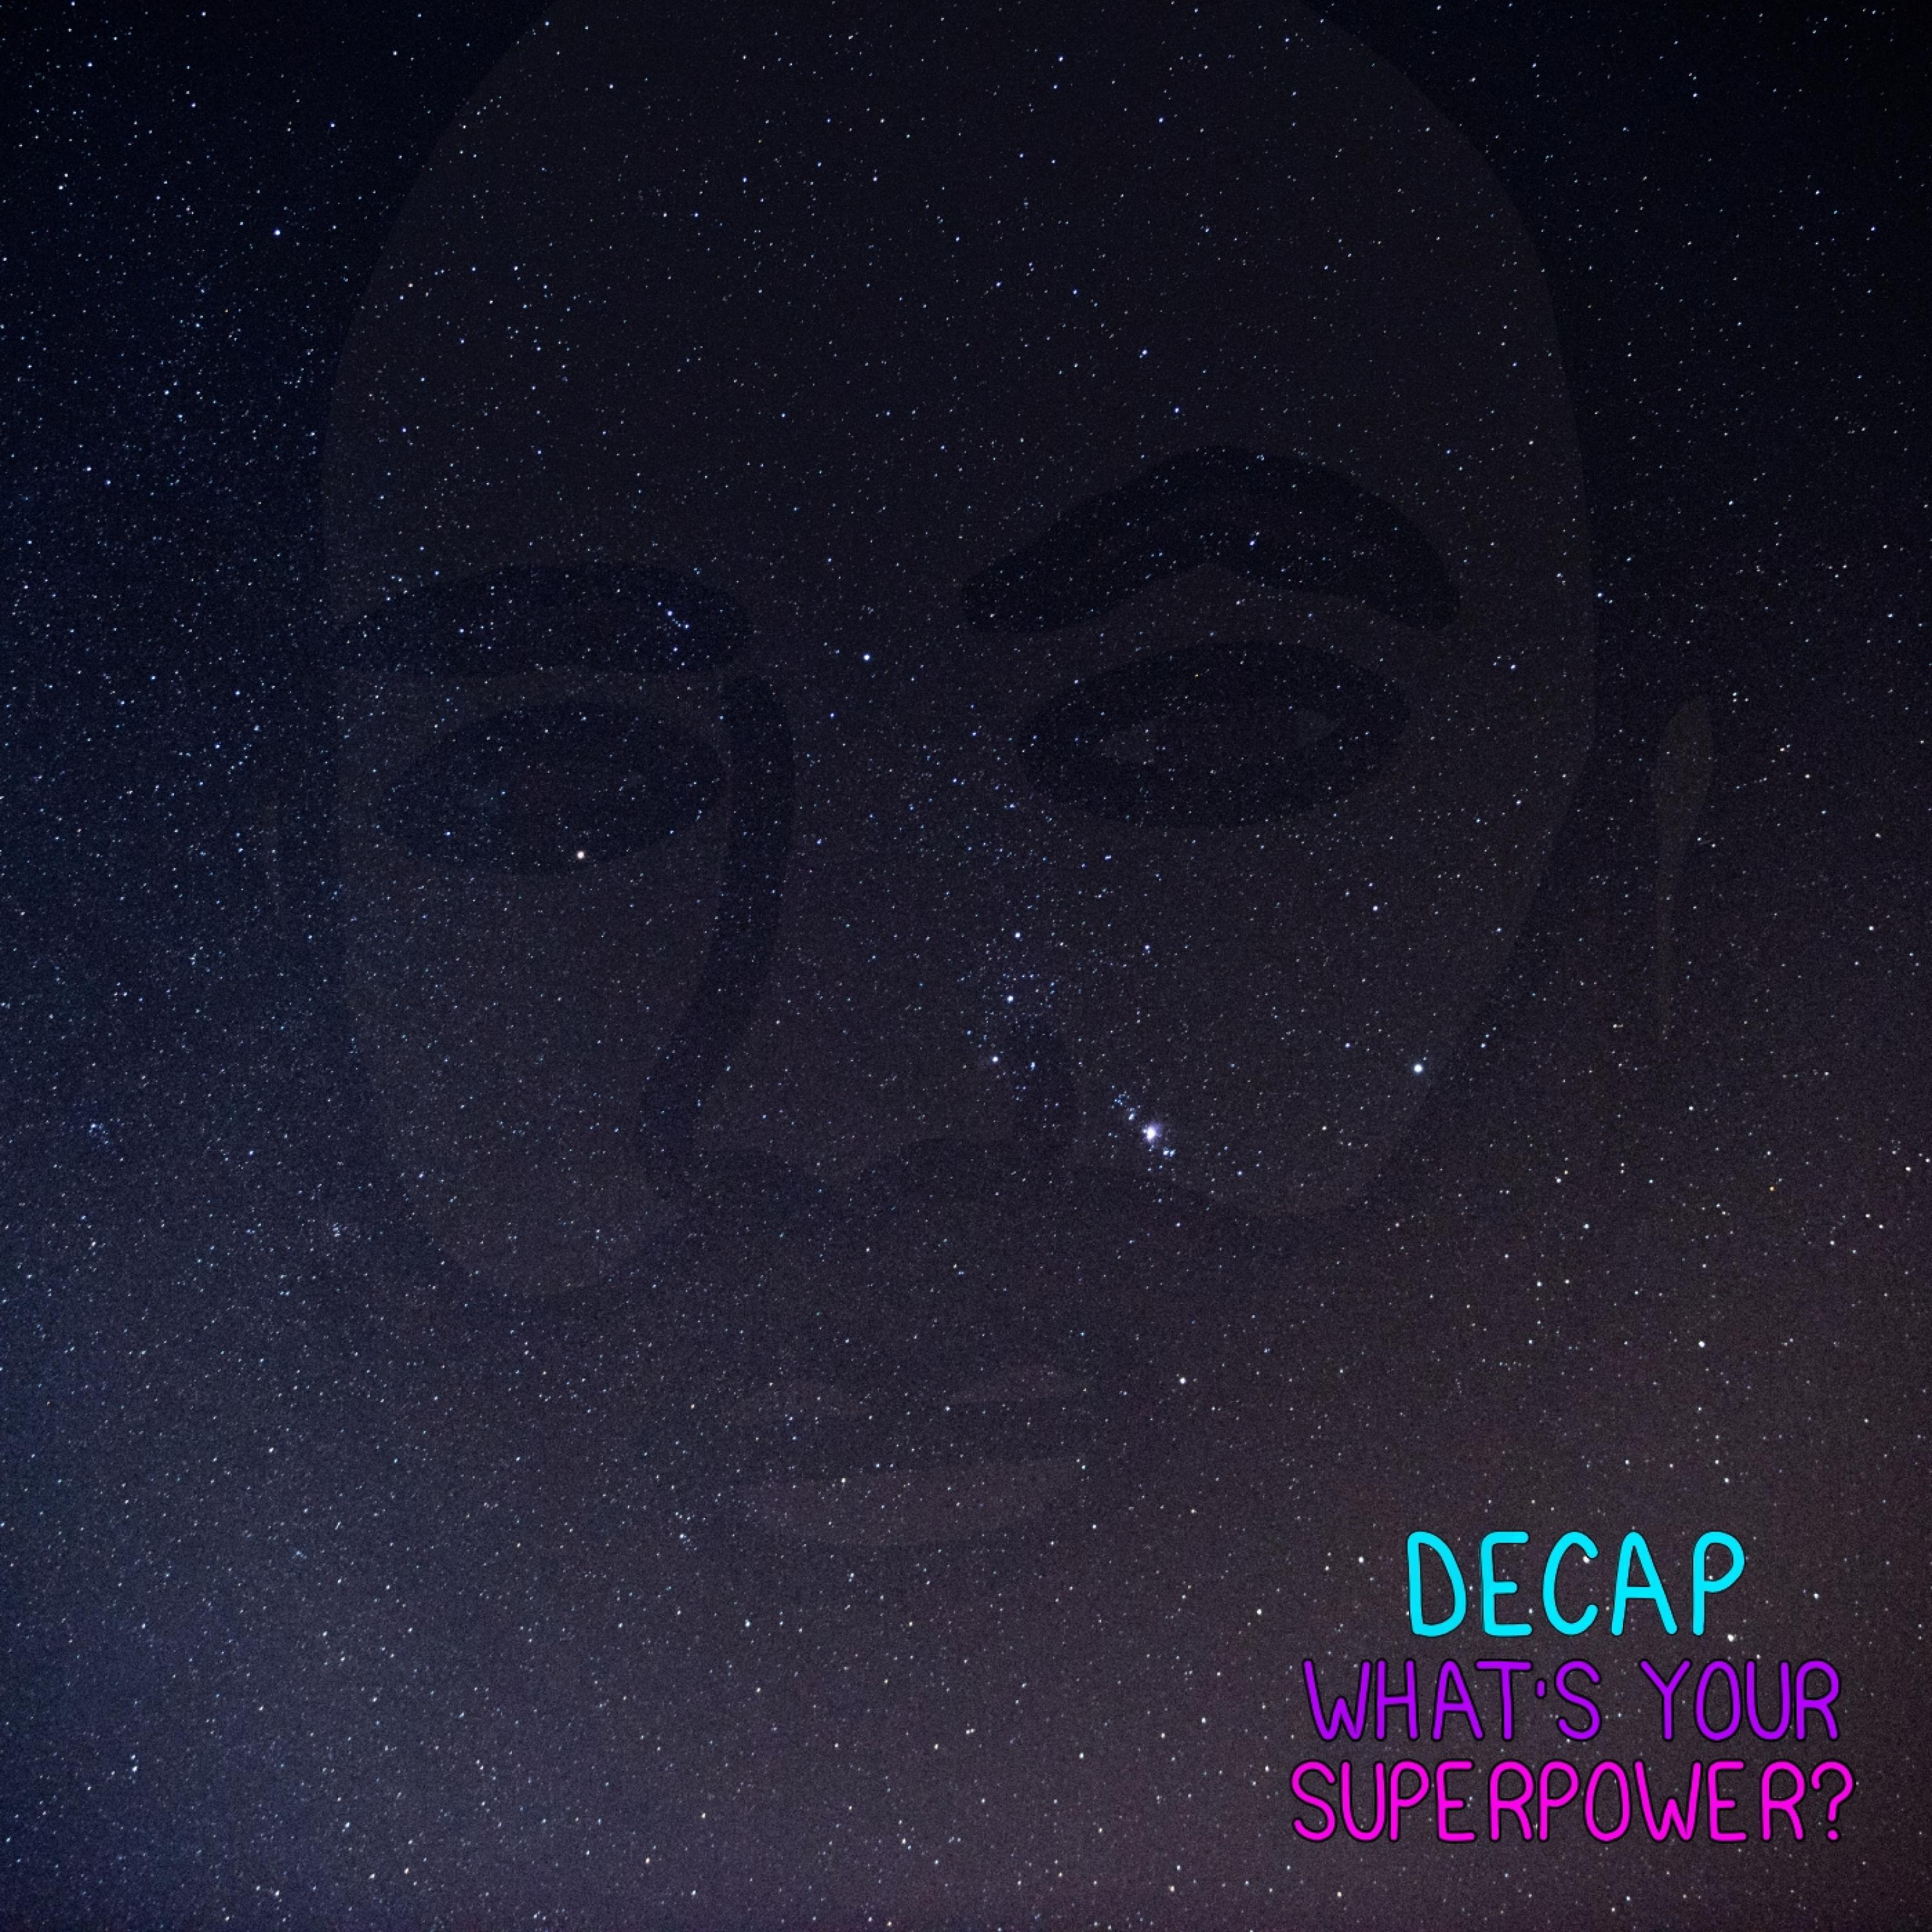 DECAP - What's Your Superpower? (feat. Ayonick, Kyla Moscovich & Seb Zillner)